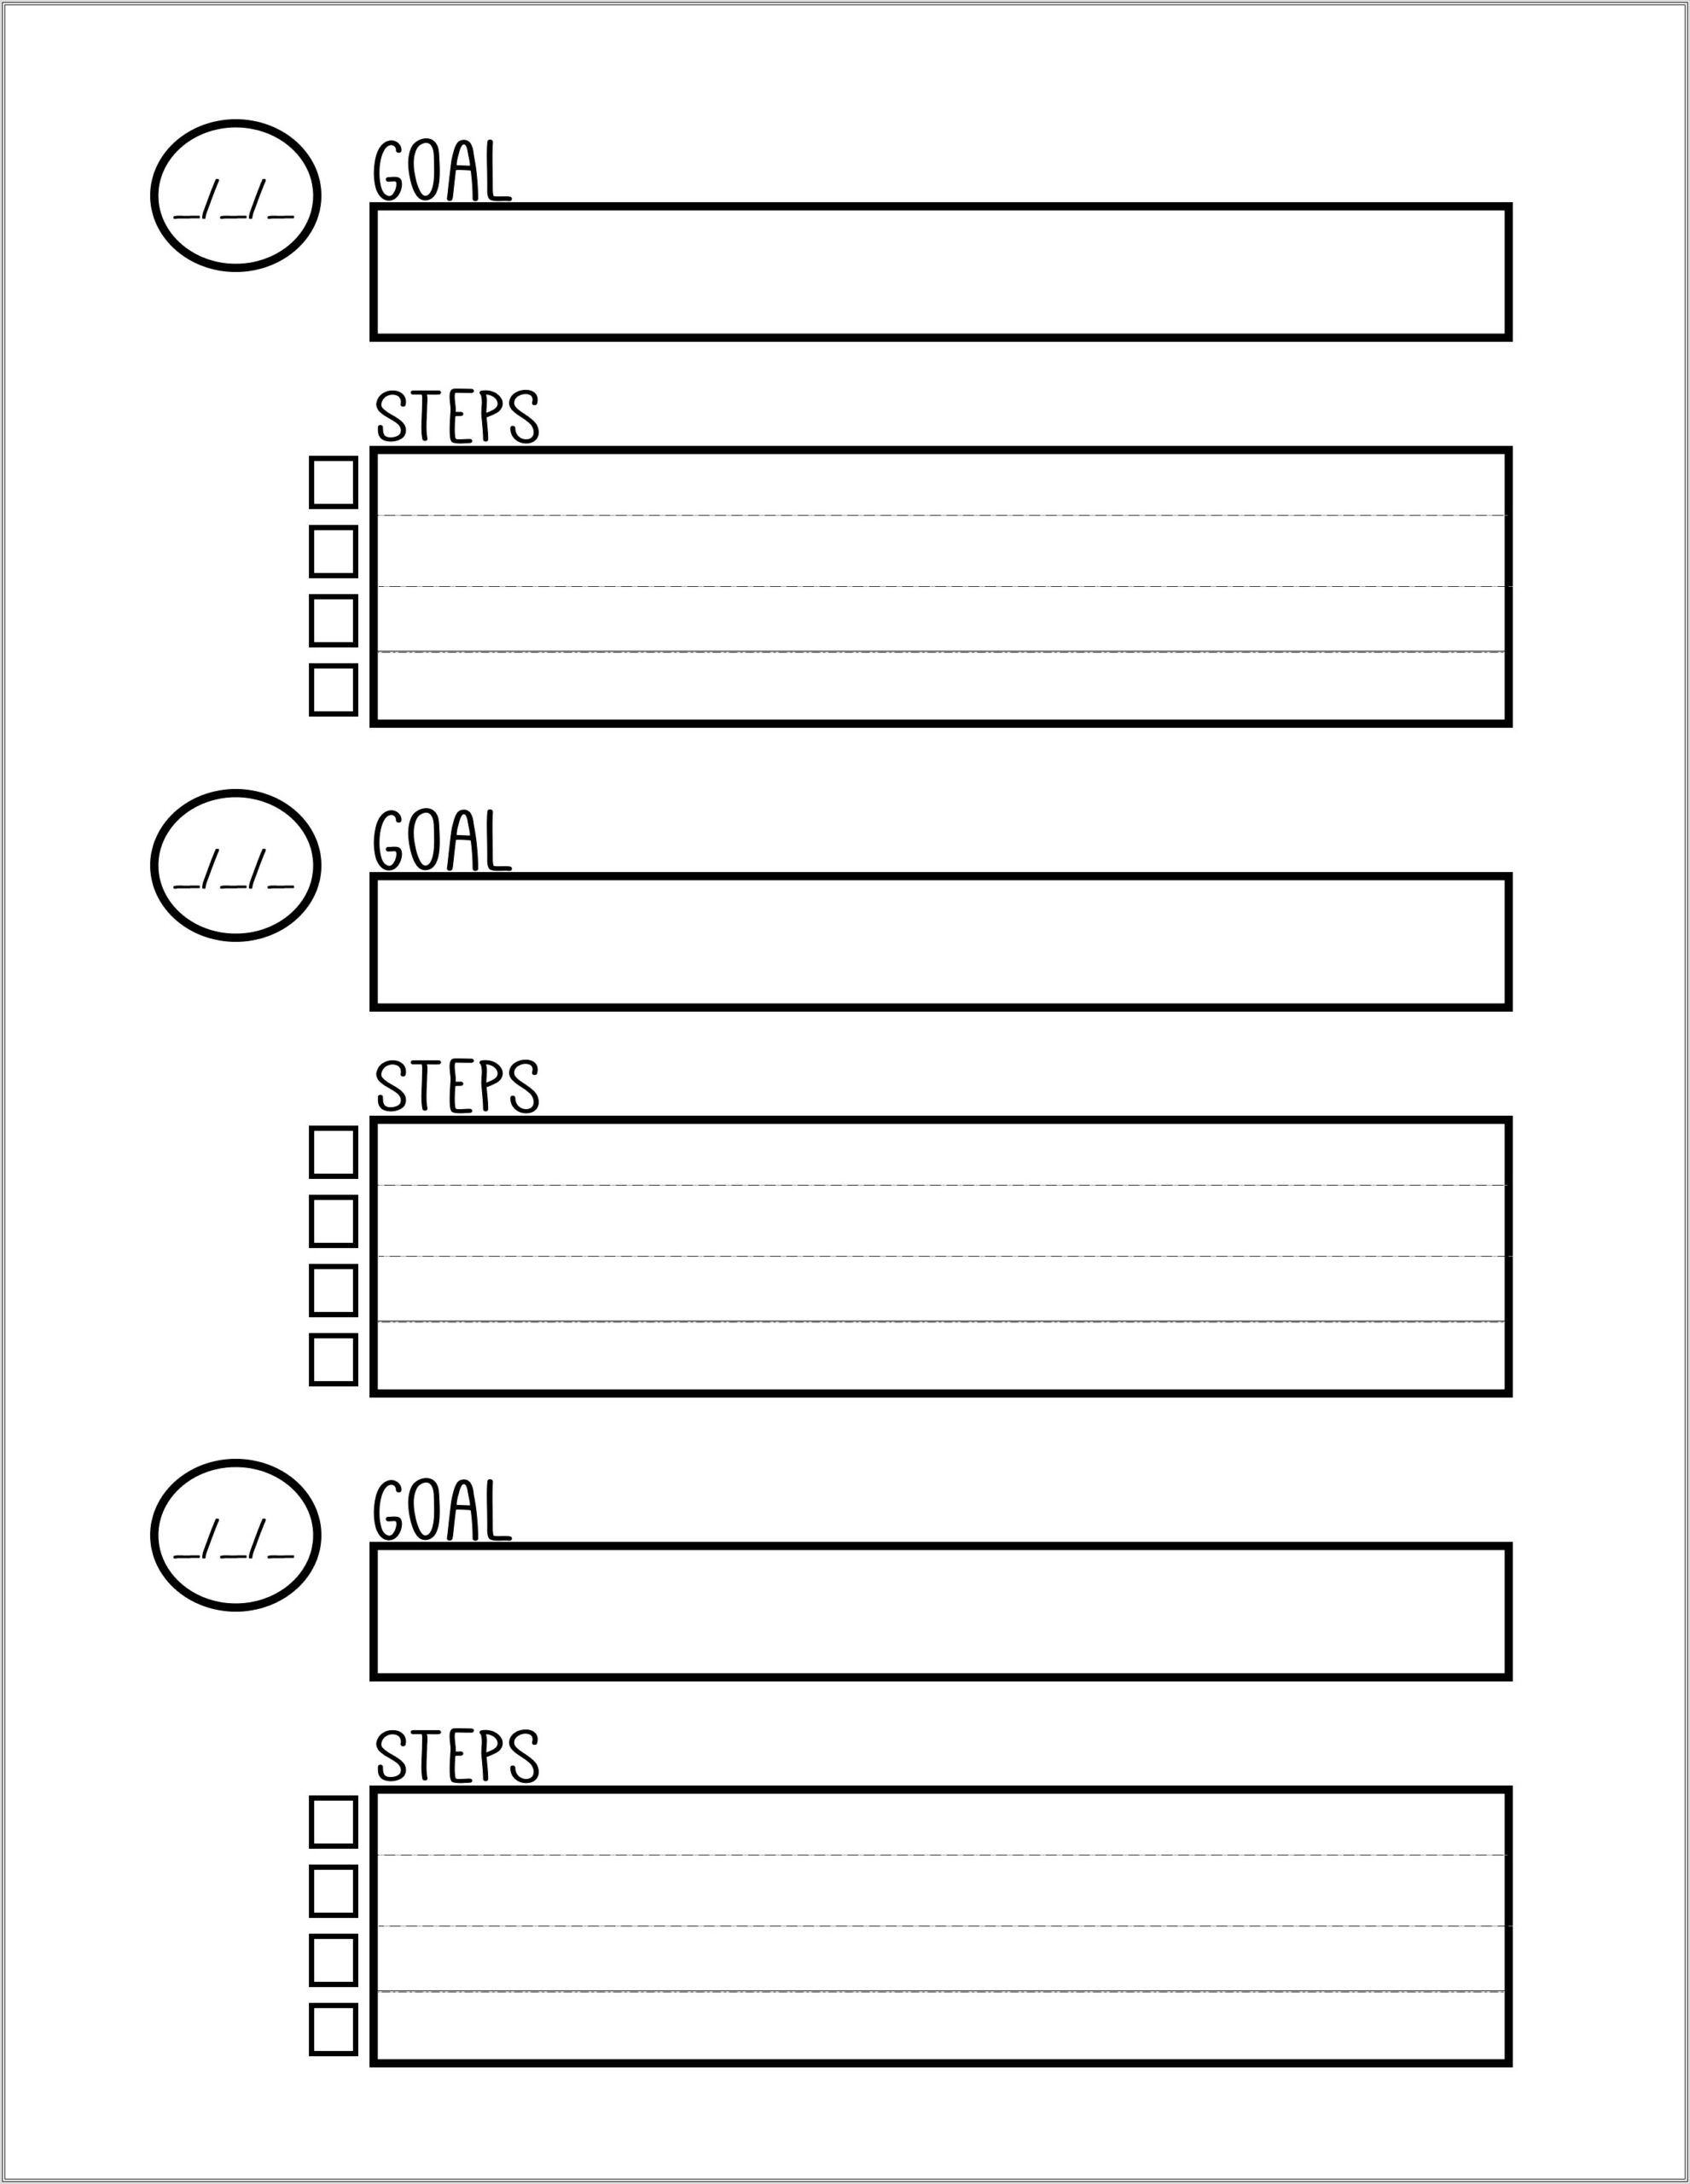 How To Fill Goal Setting Worksheets